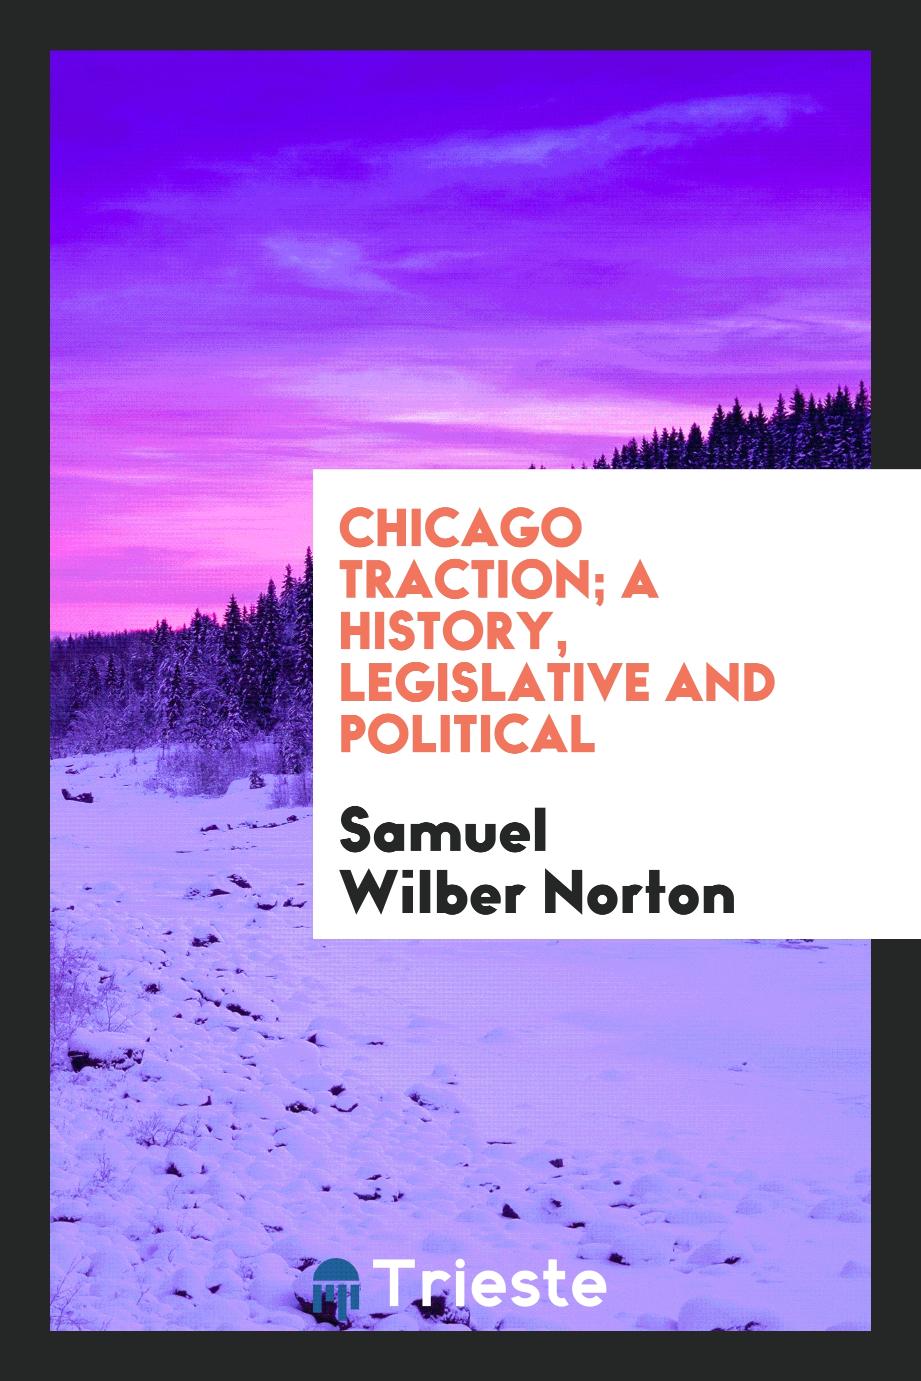 Chicago traction; a history, legislative and political